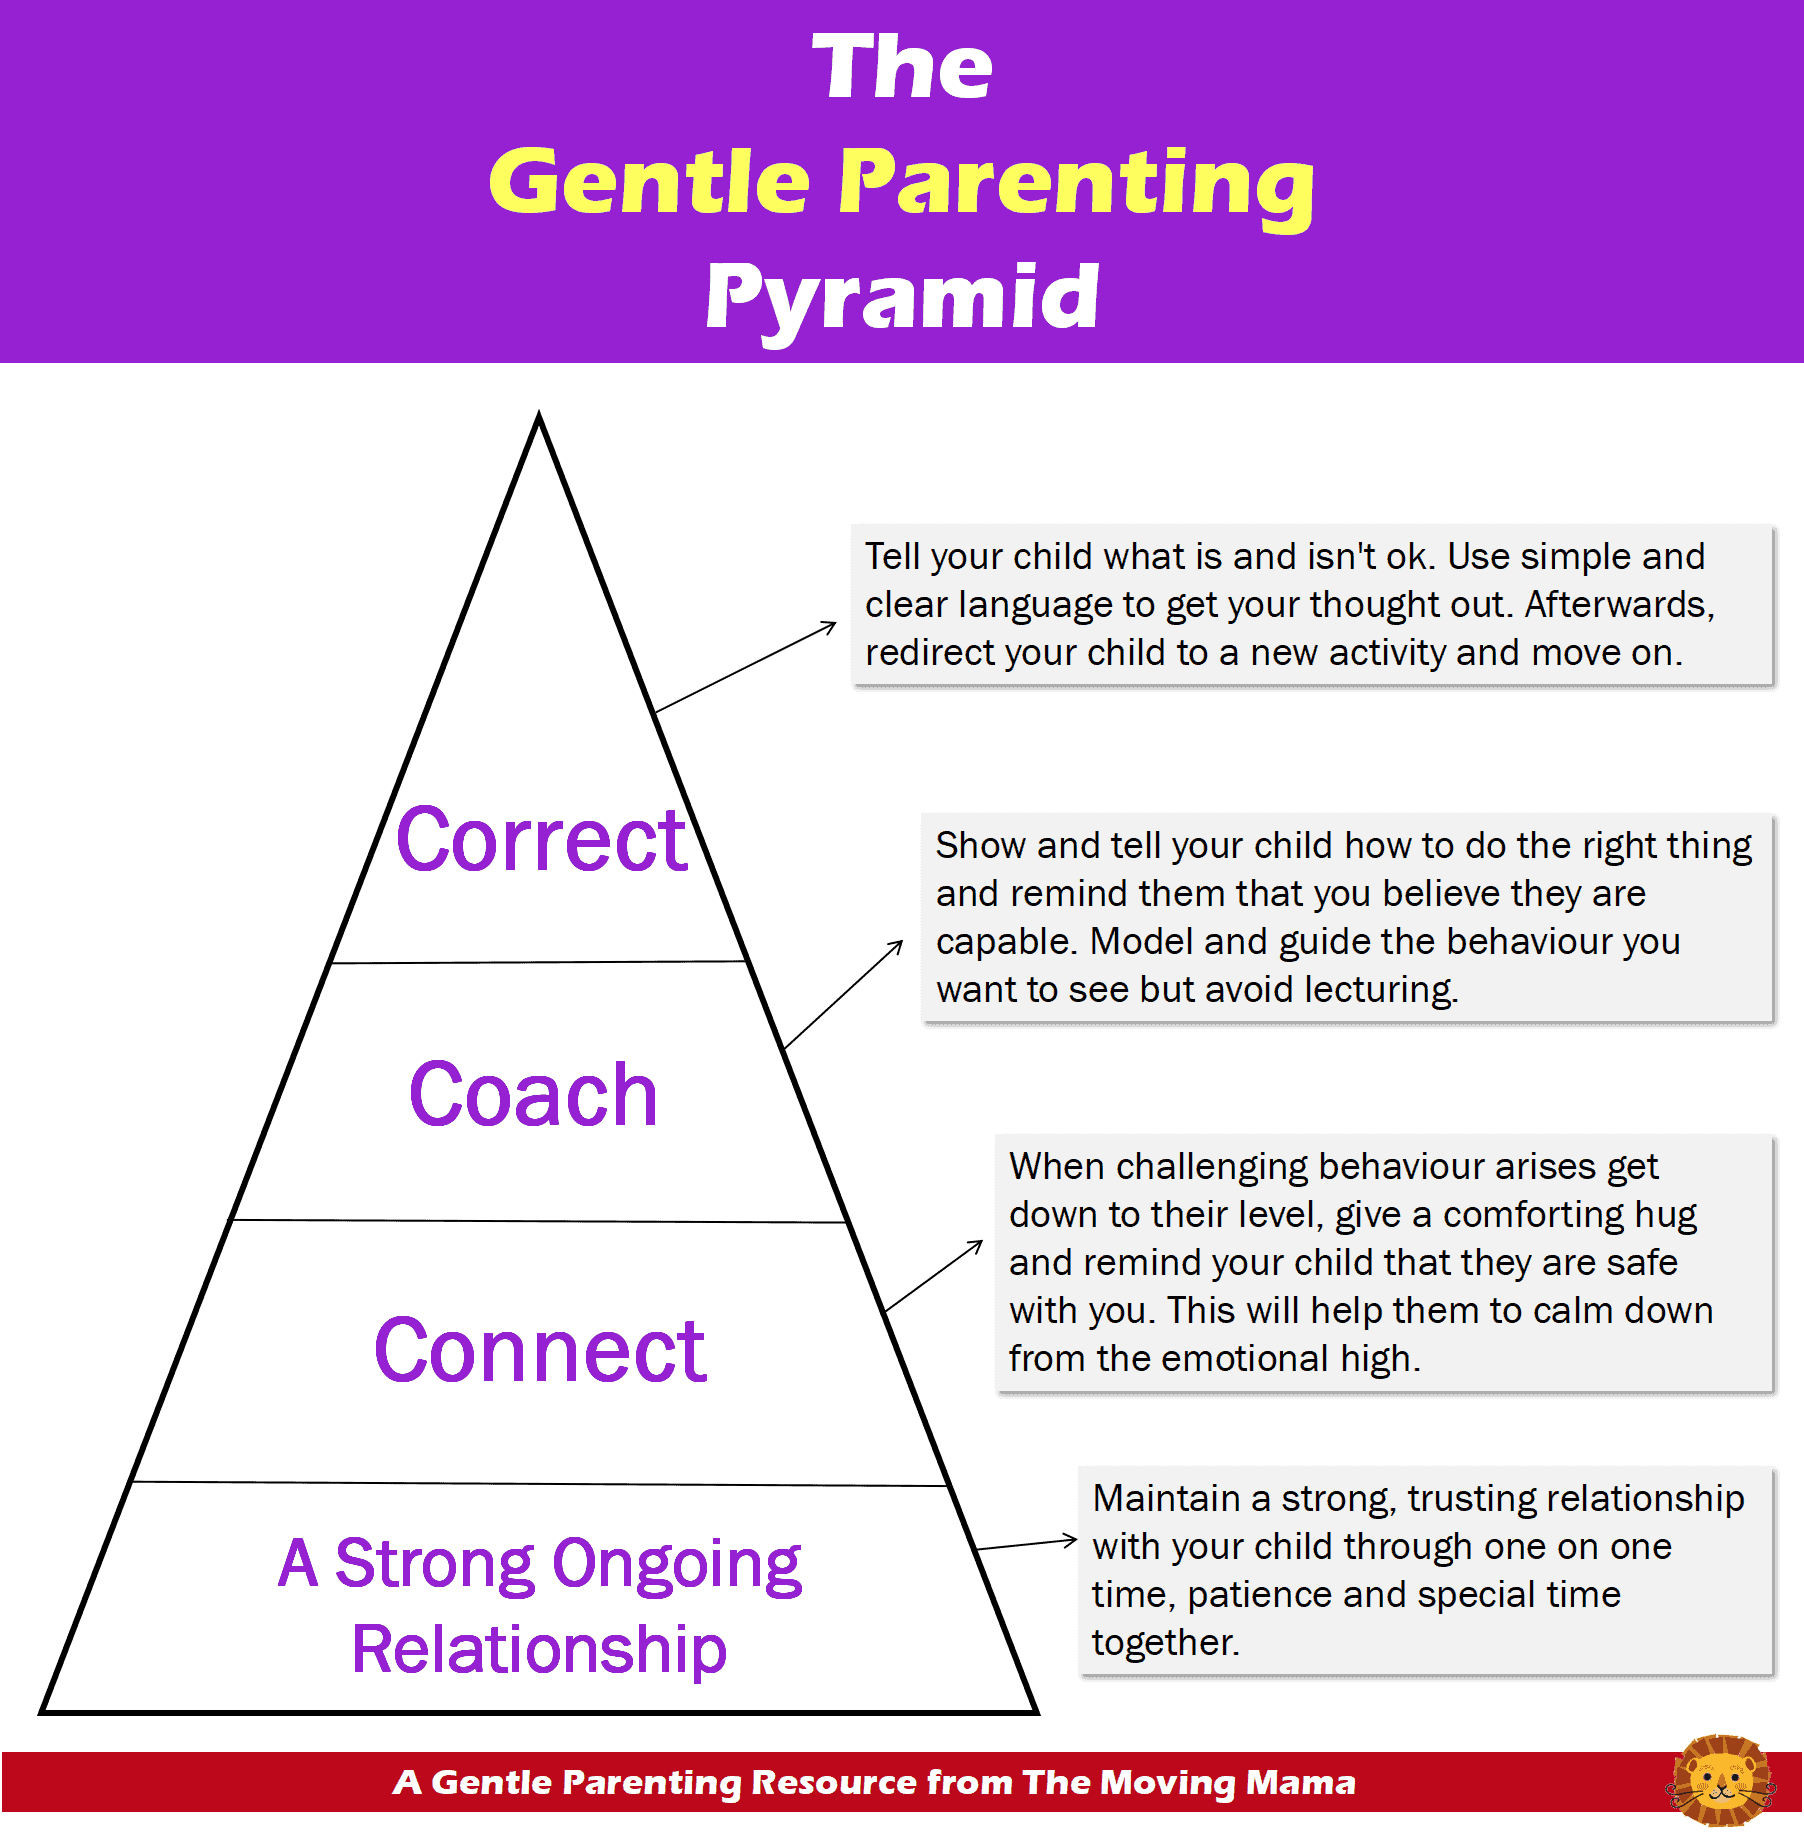 The-Gentle-Parenting-Pyramid: A Strong Ongoing Relationship, Connect, Coach, Correct